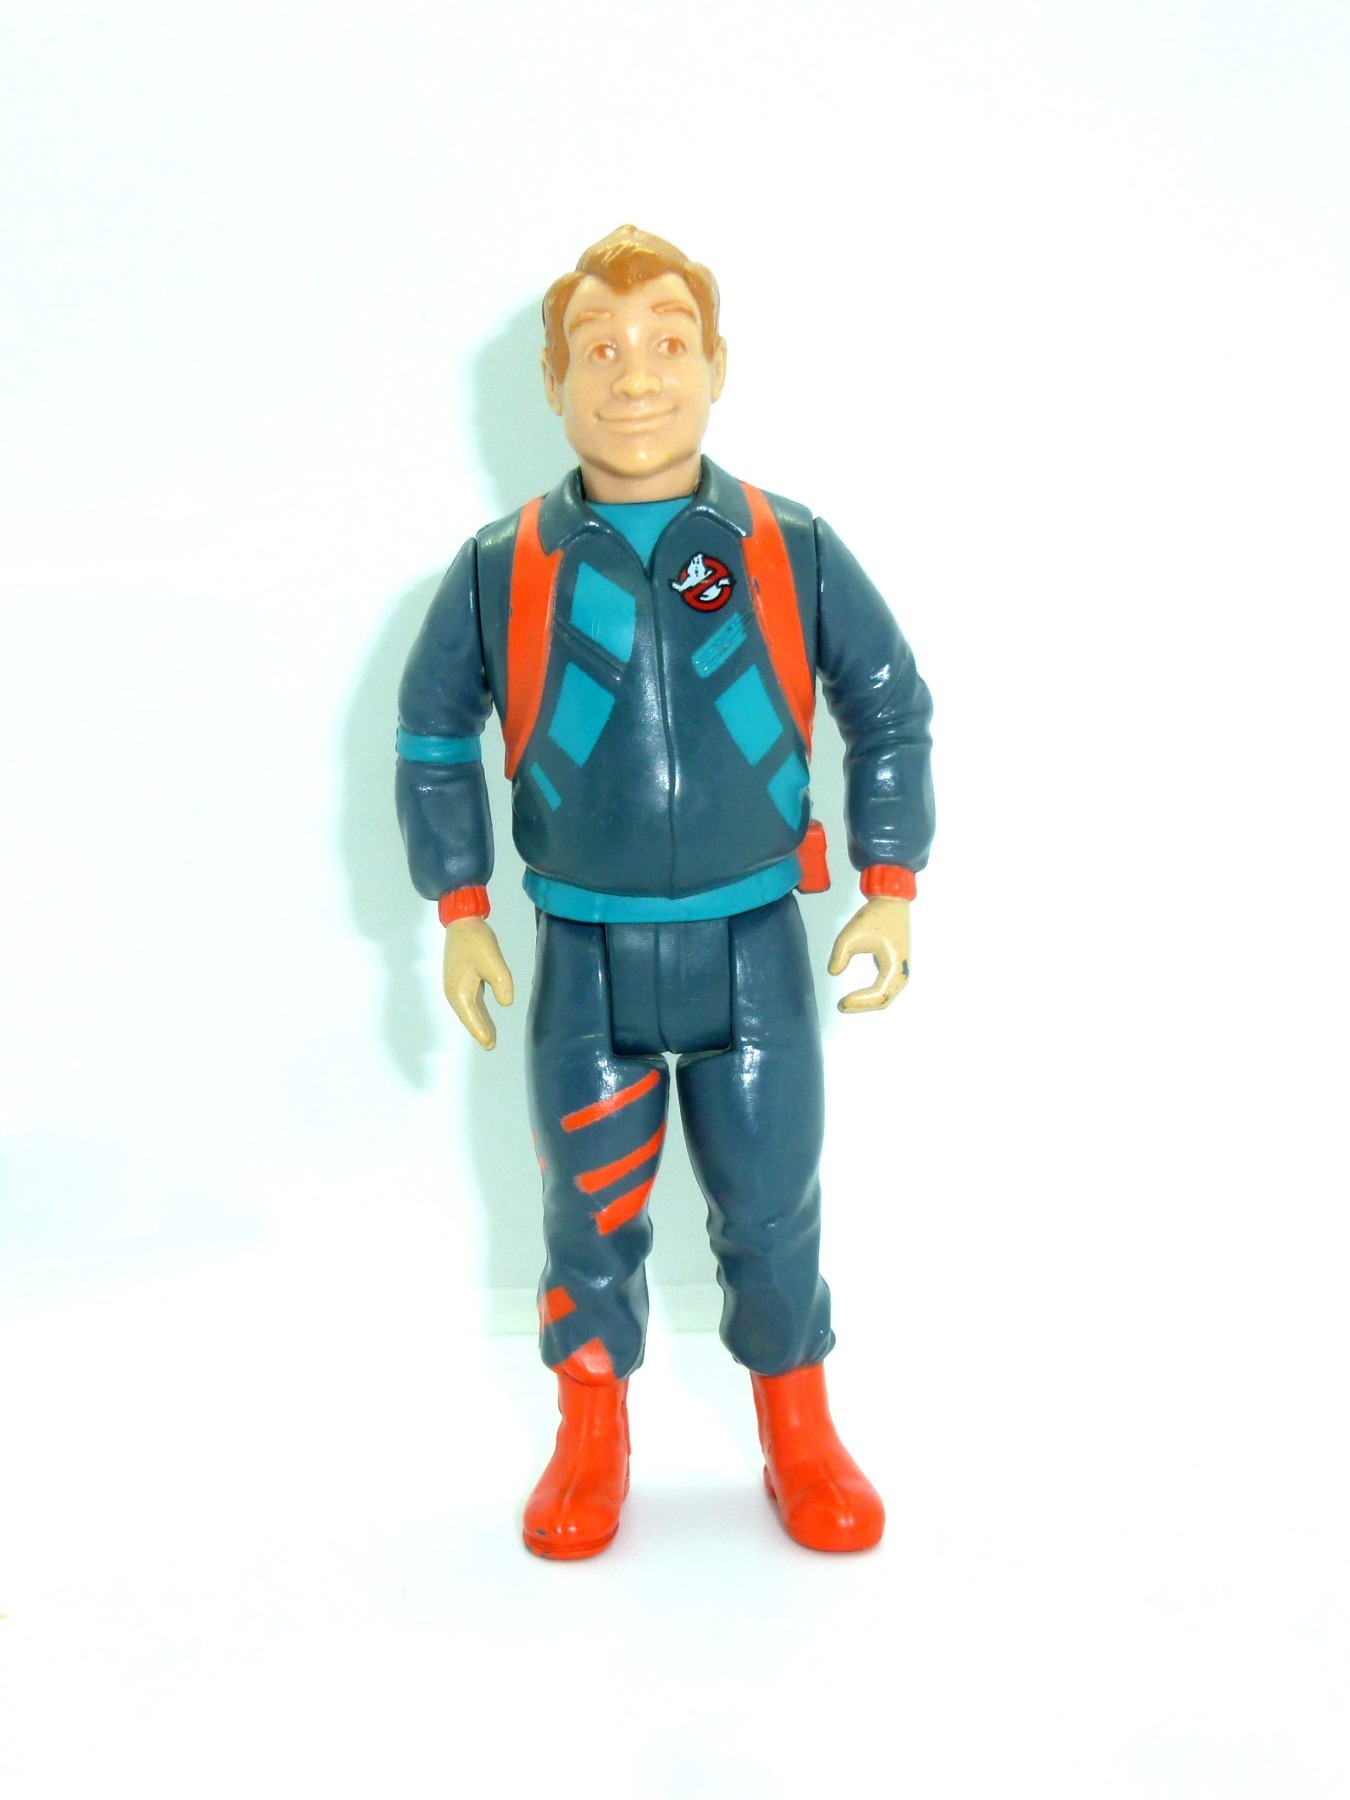 Ray Stantz - Power Pack Heroes Kenner 1986